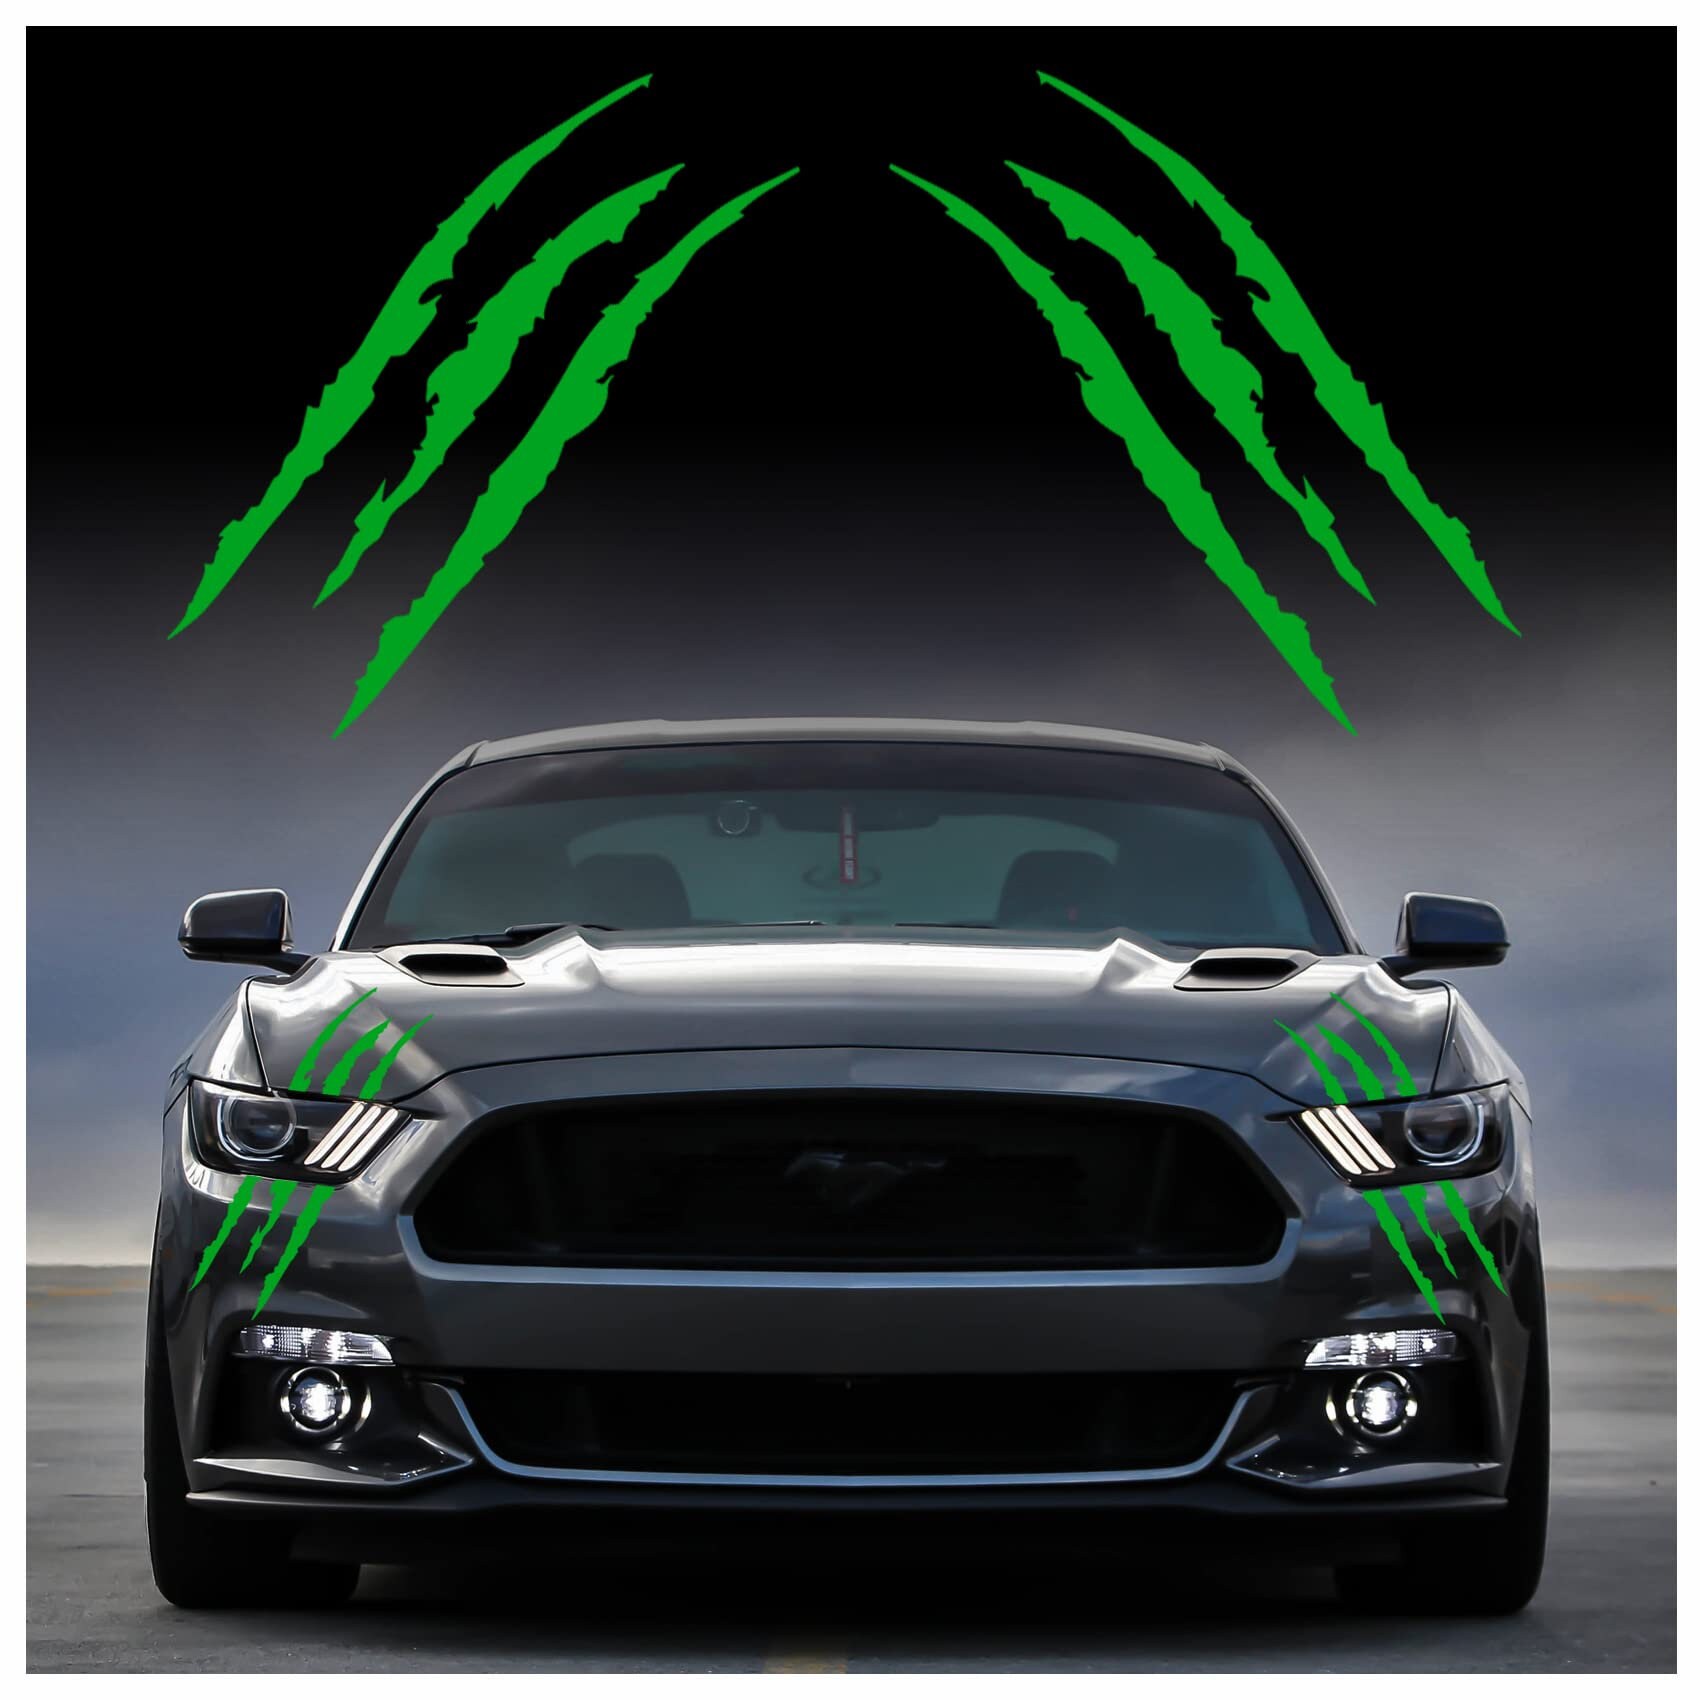 Claw Marks Headlight Decal Available in Twelve Colors. Genuine ViaViny - 4